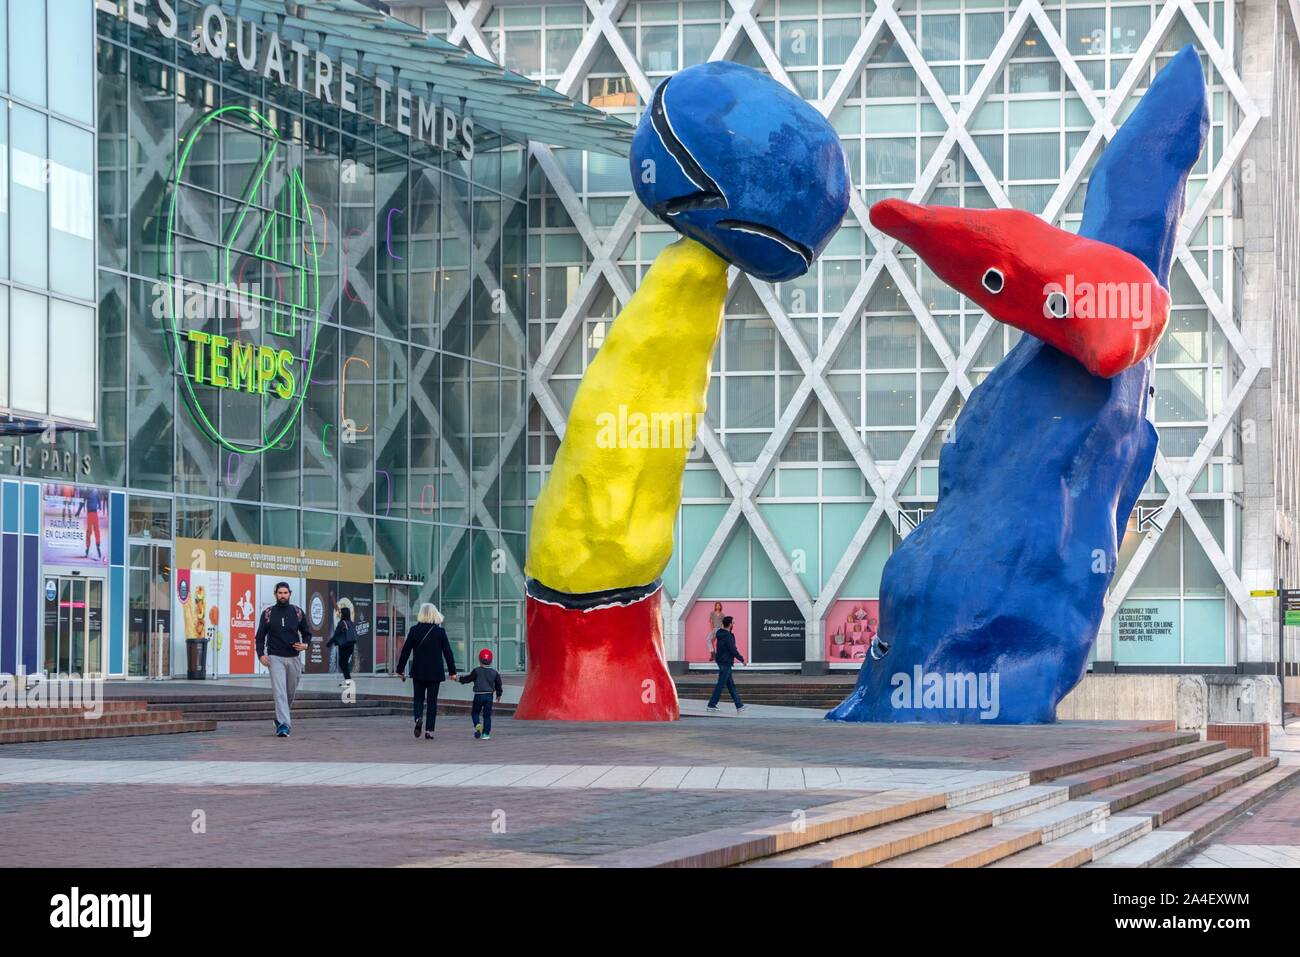 'THE FANTASTIC CHARACTERS' SCULPTURE BY THE ARTIST JOAN MIRO IN 1977 IN FRONT OF THE QUATRE TEMPS SHOPPING MALL, PARIS-LA DEFENSE, PUTEAUX, FRANCE Stock Photo